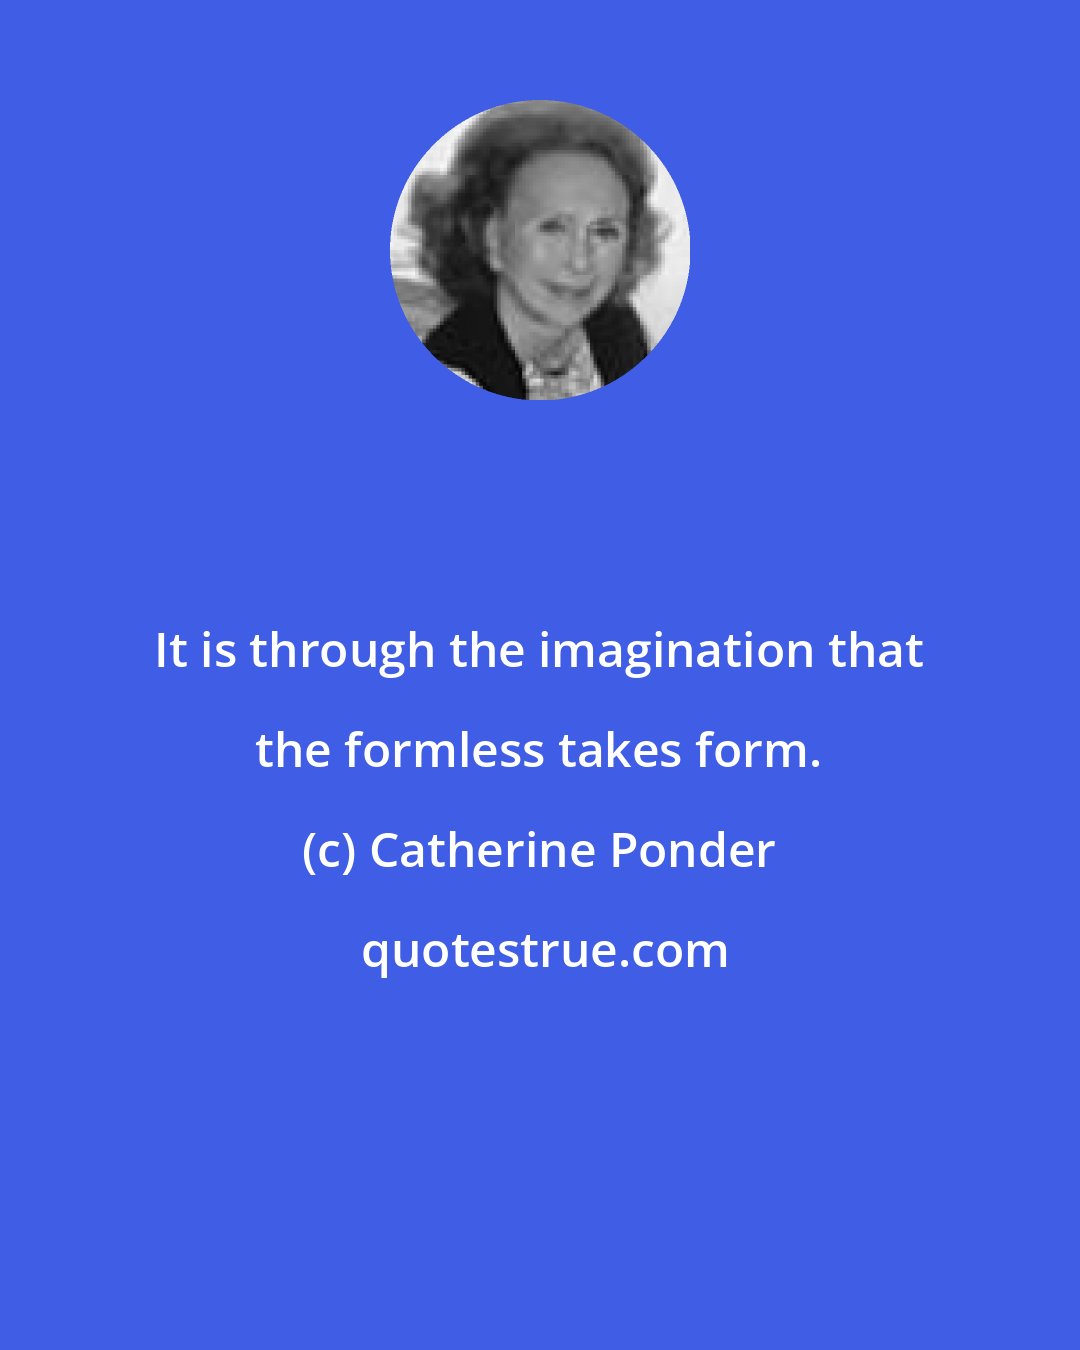 Catherine Ponder: It is through the imagination that the formless takes form.